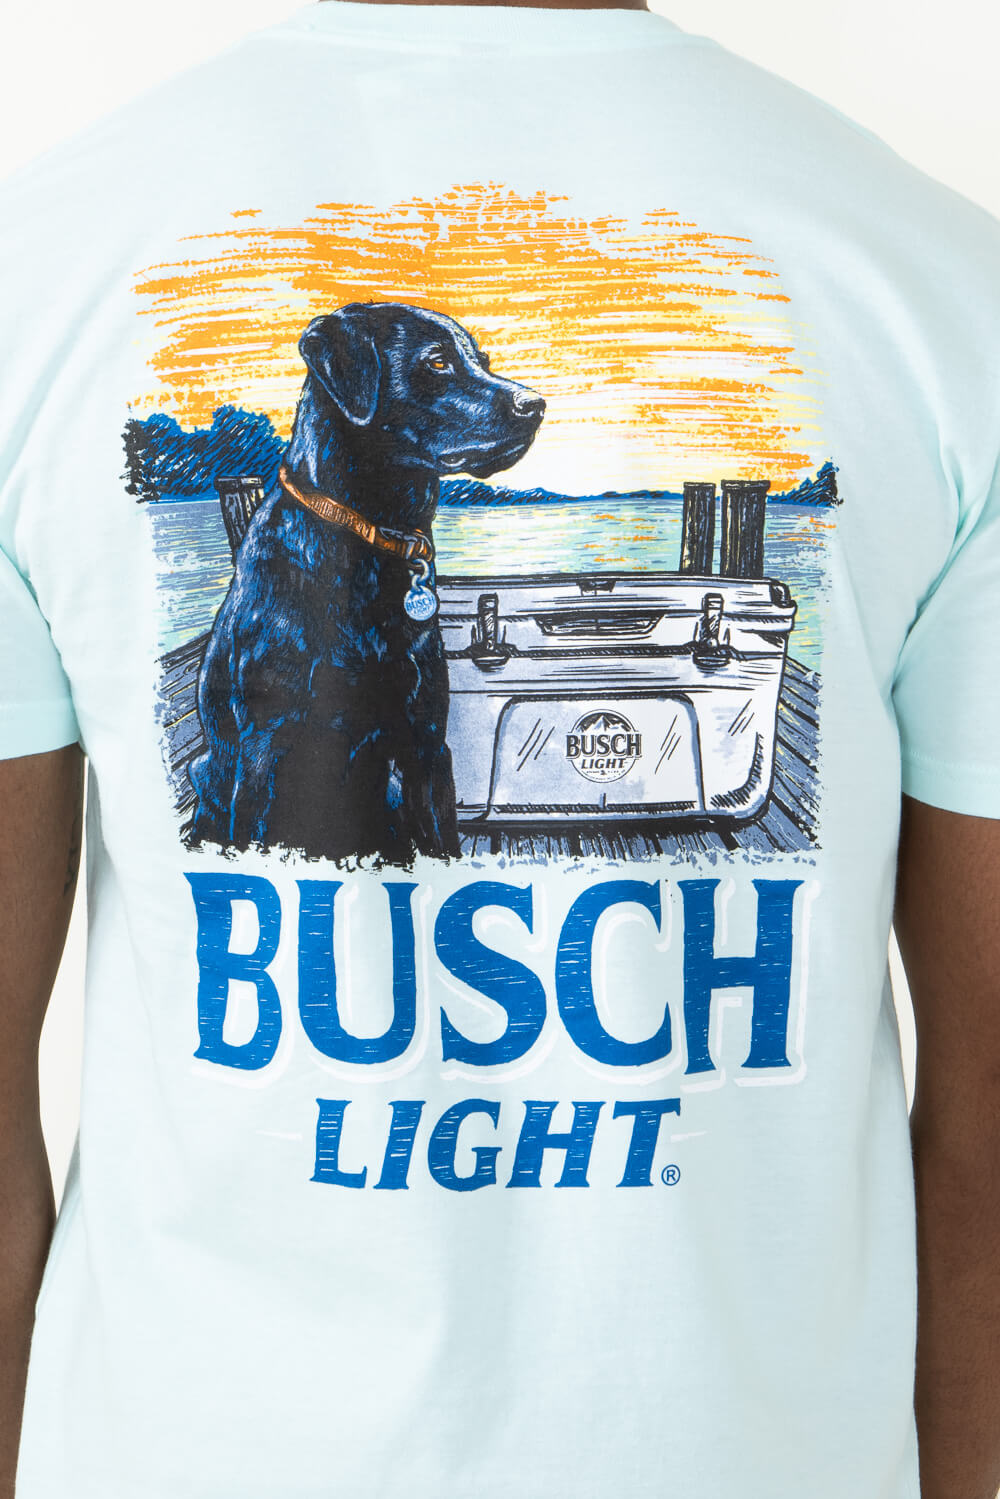 Busch Busch Light Head for The Mountains Fishing Front & Back Print  T-Shirt, Gray - Extra Large